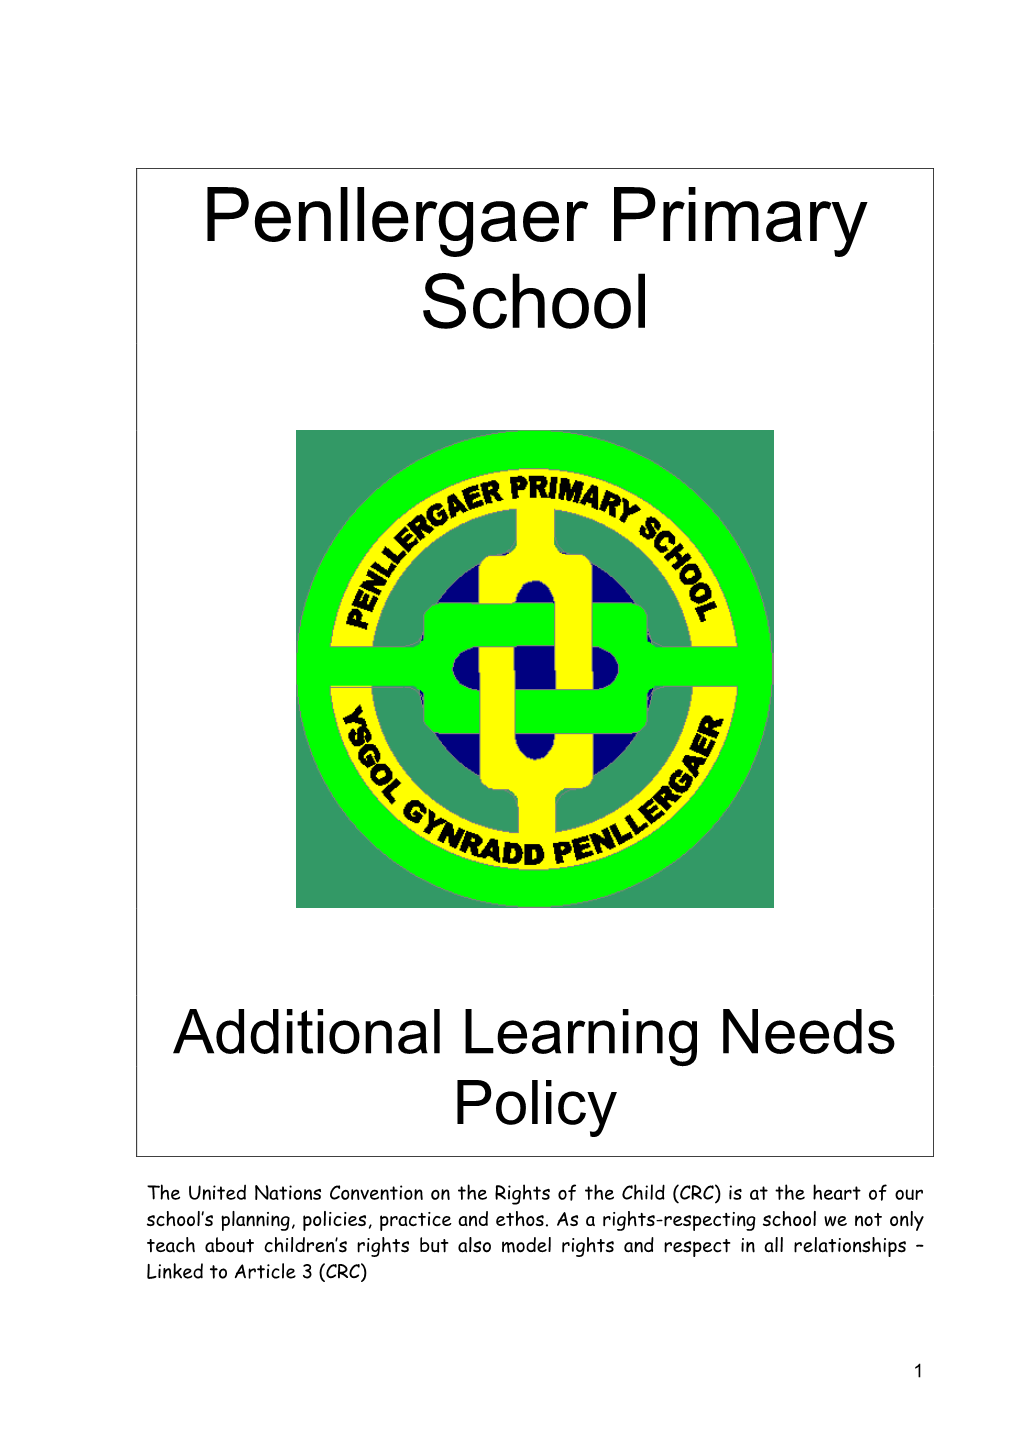 Additional Learning Needs Policy